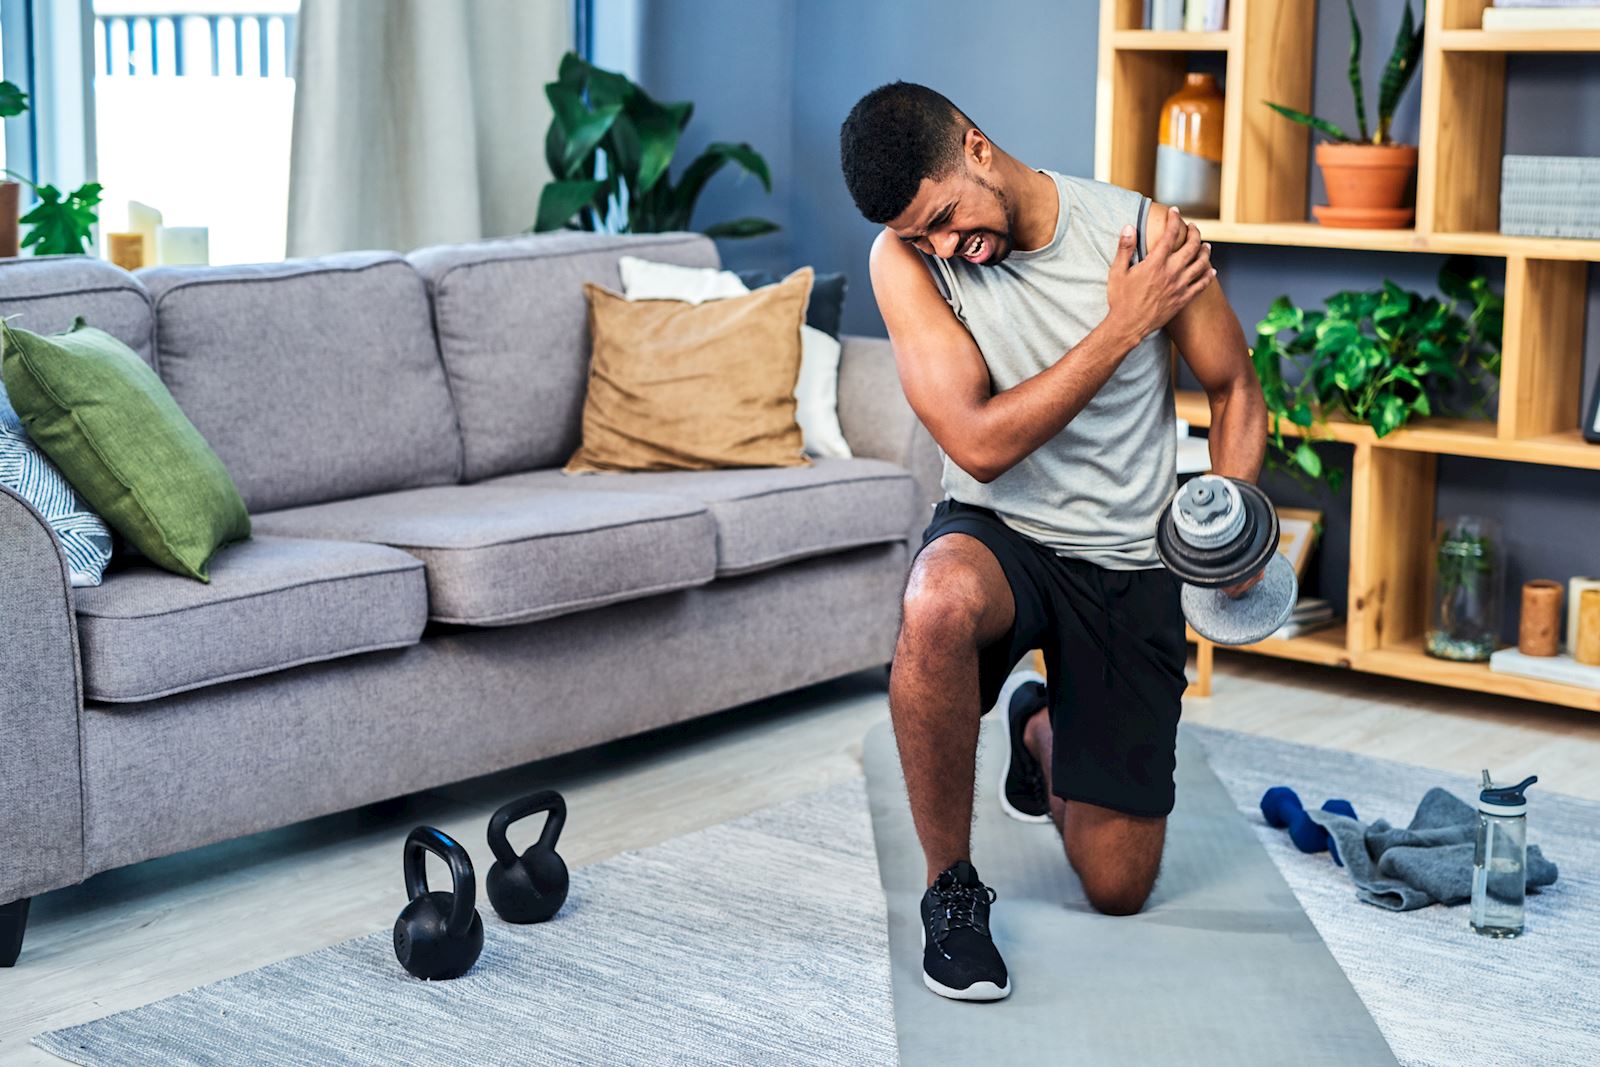 How to Tell When You've Torn or Injured Your Rotator Cuff